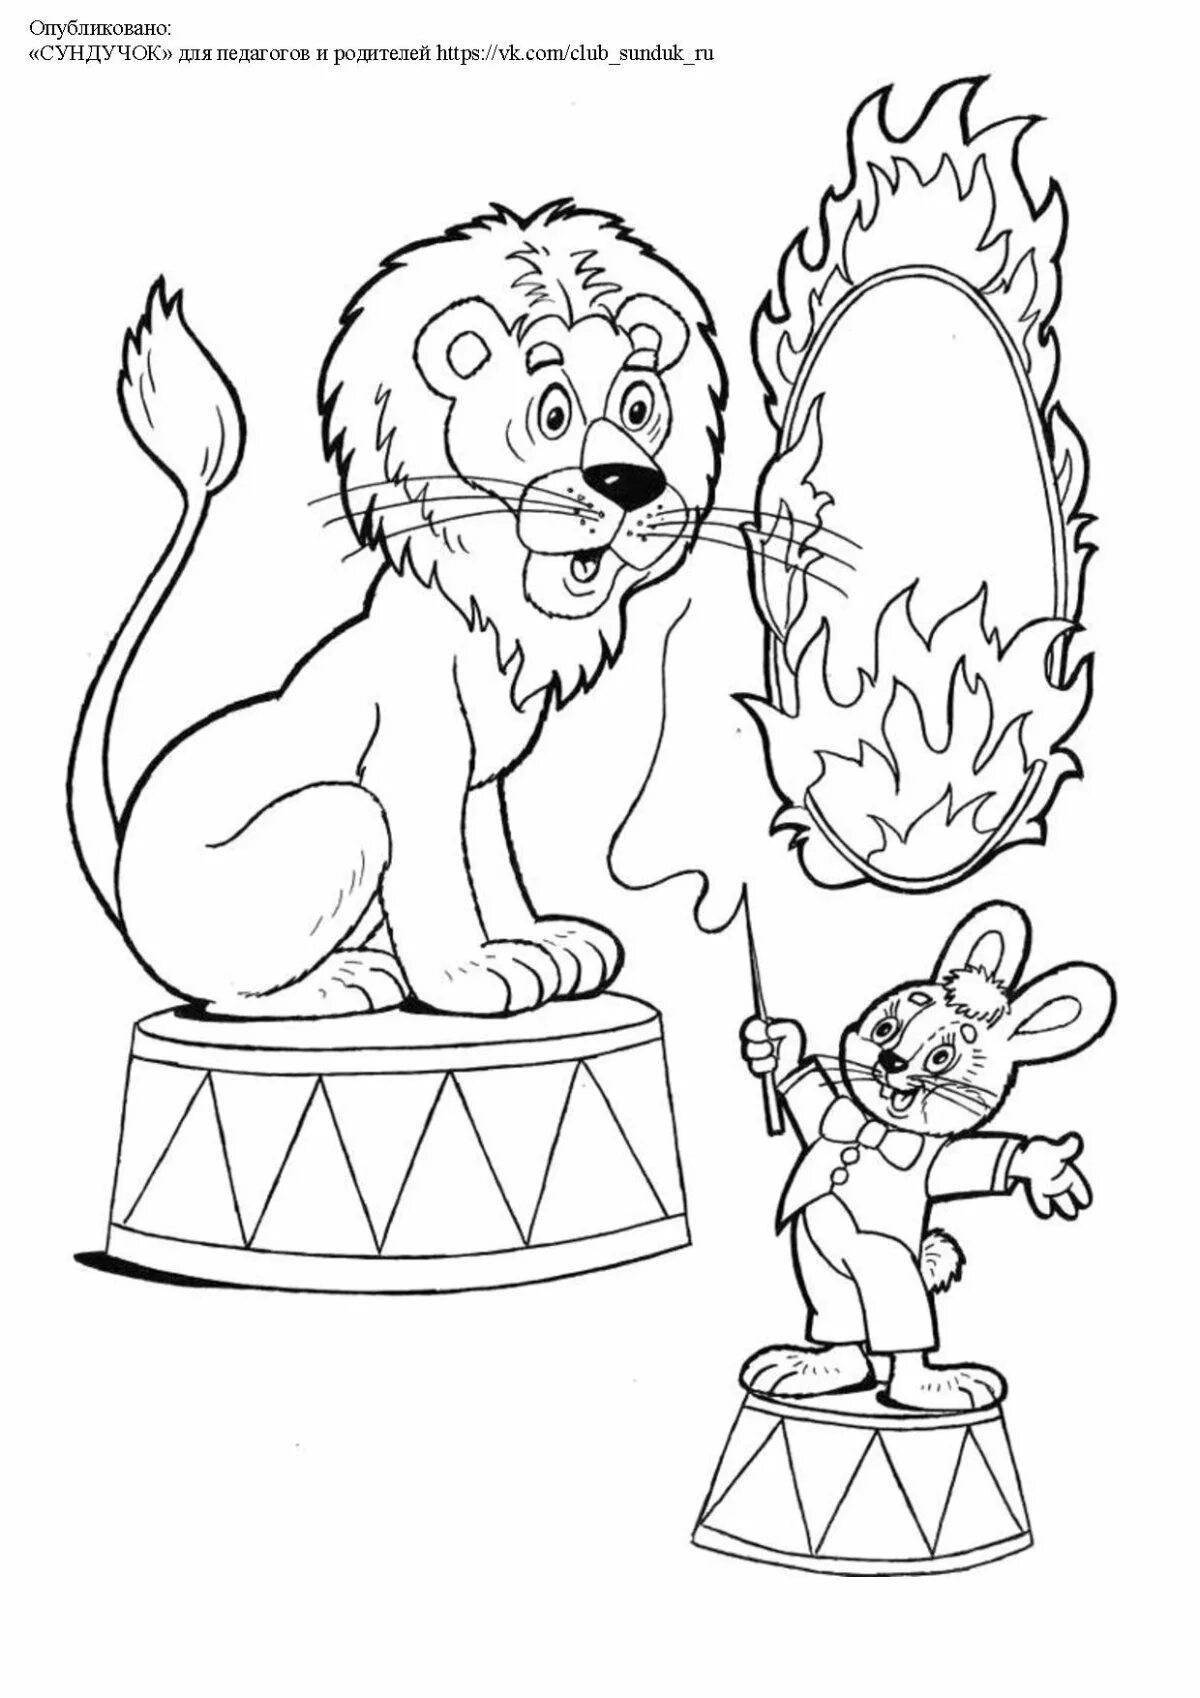 Exciting circus coloring book for 7-8 year olds